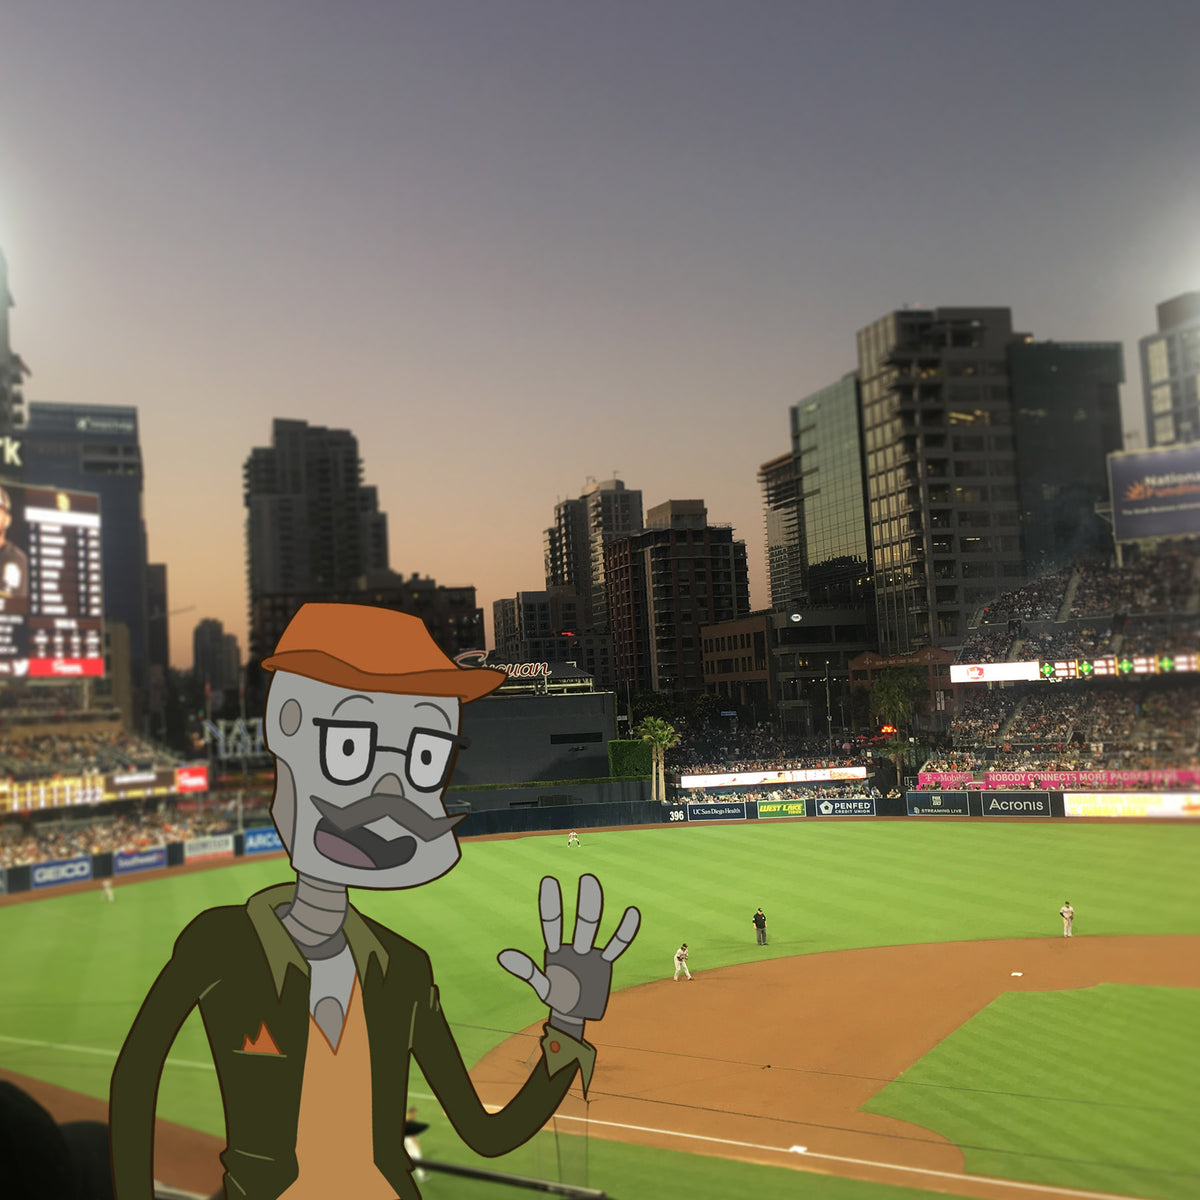 Guide to catching a Padres game at Petco Park